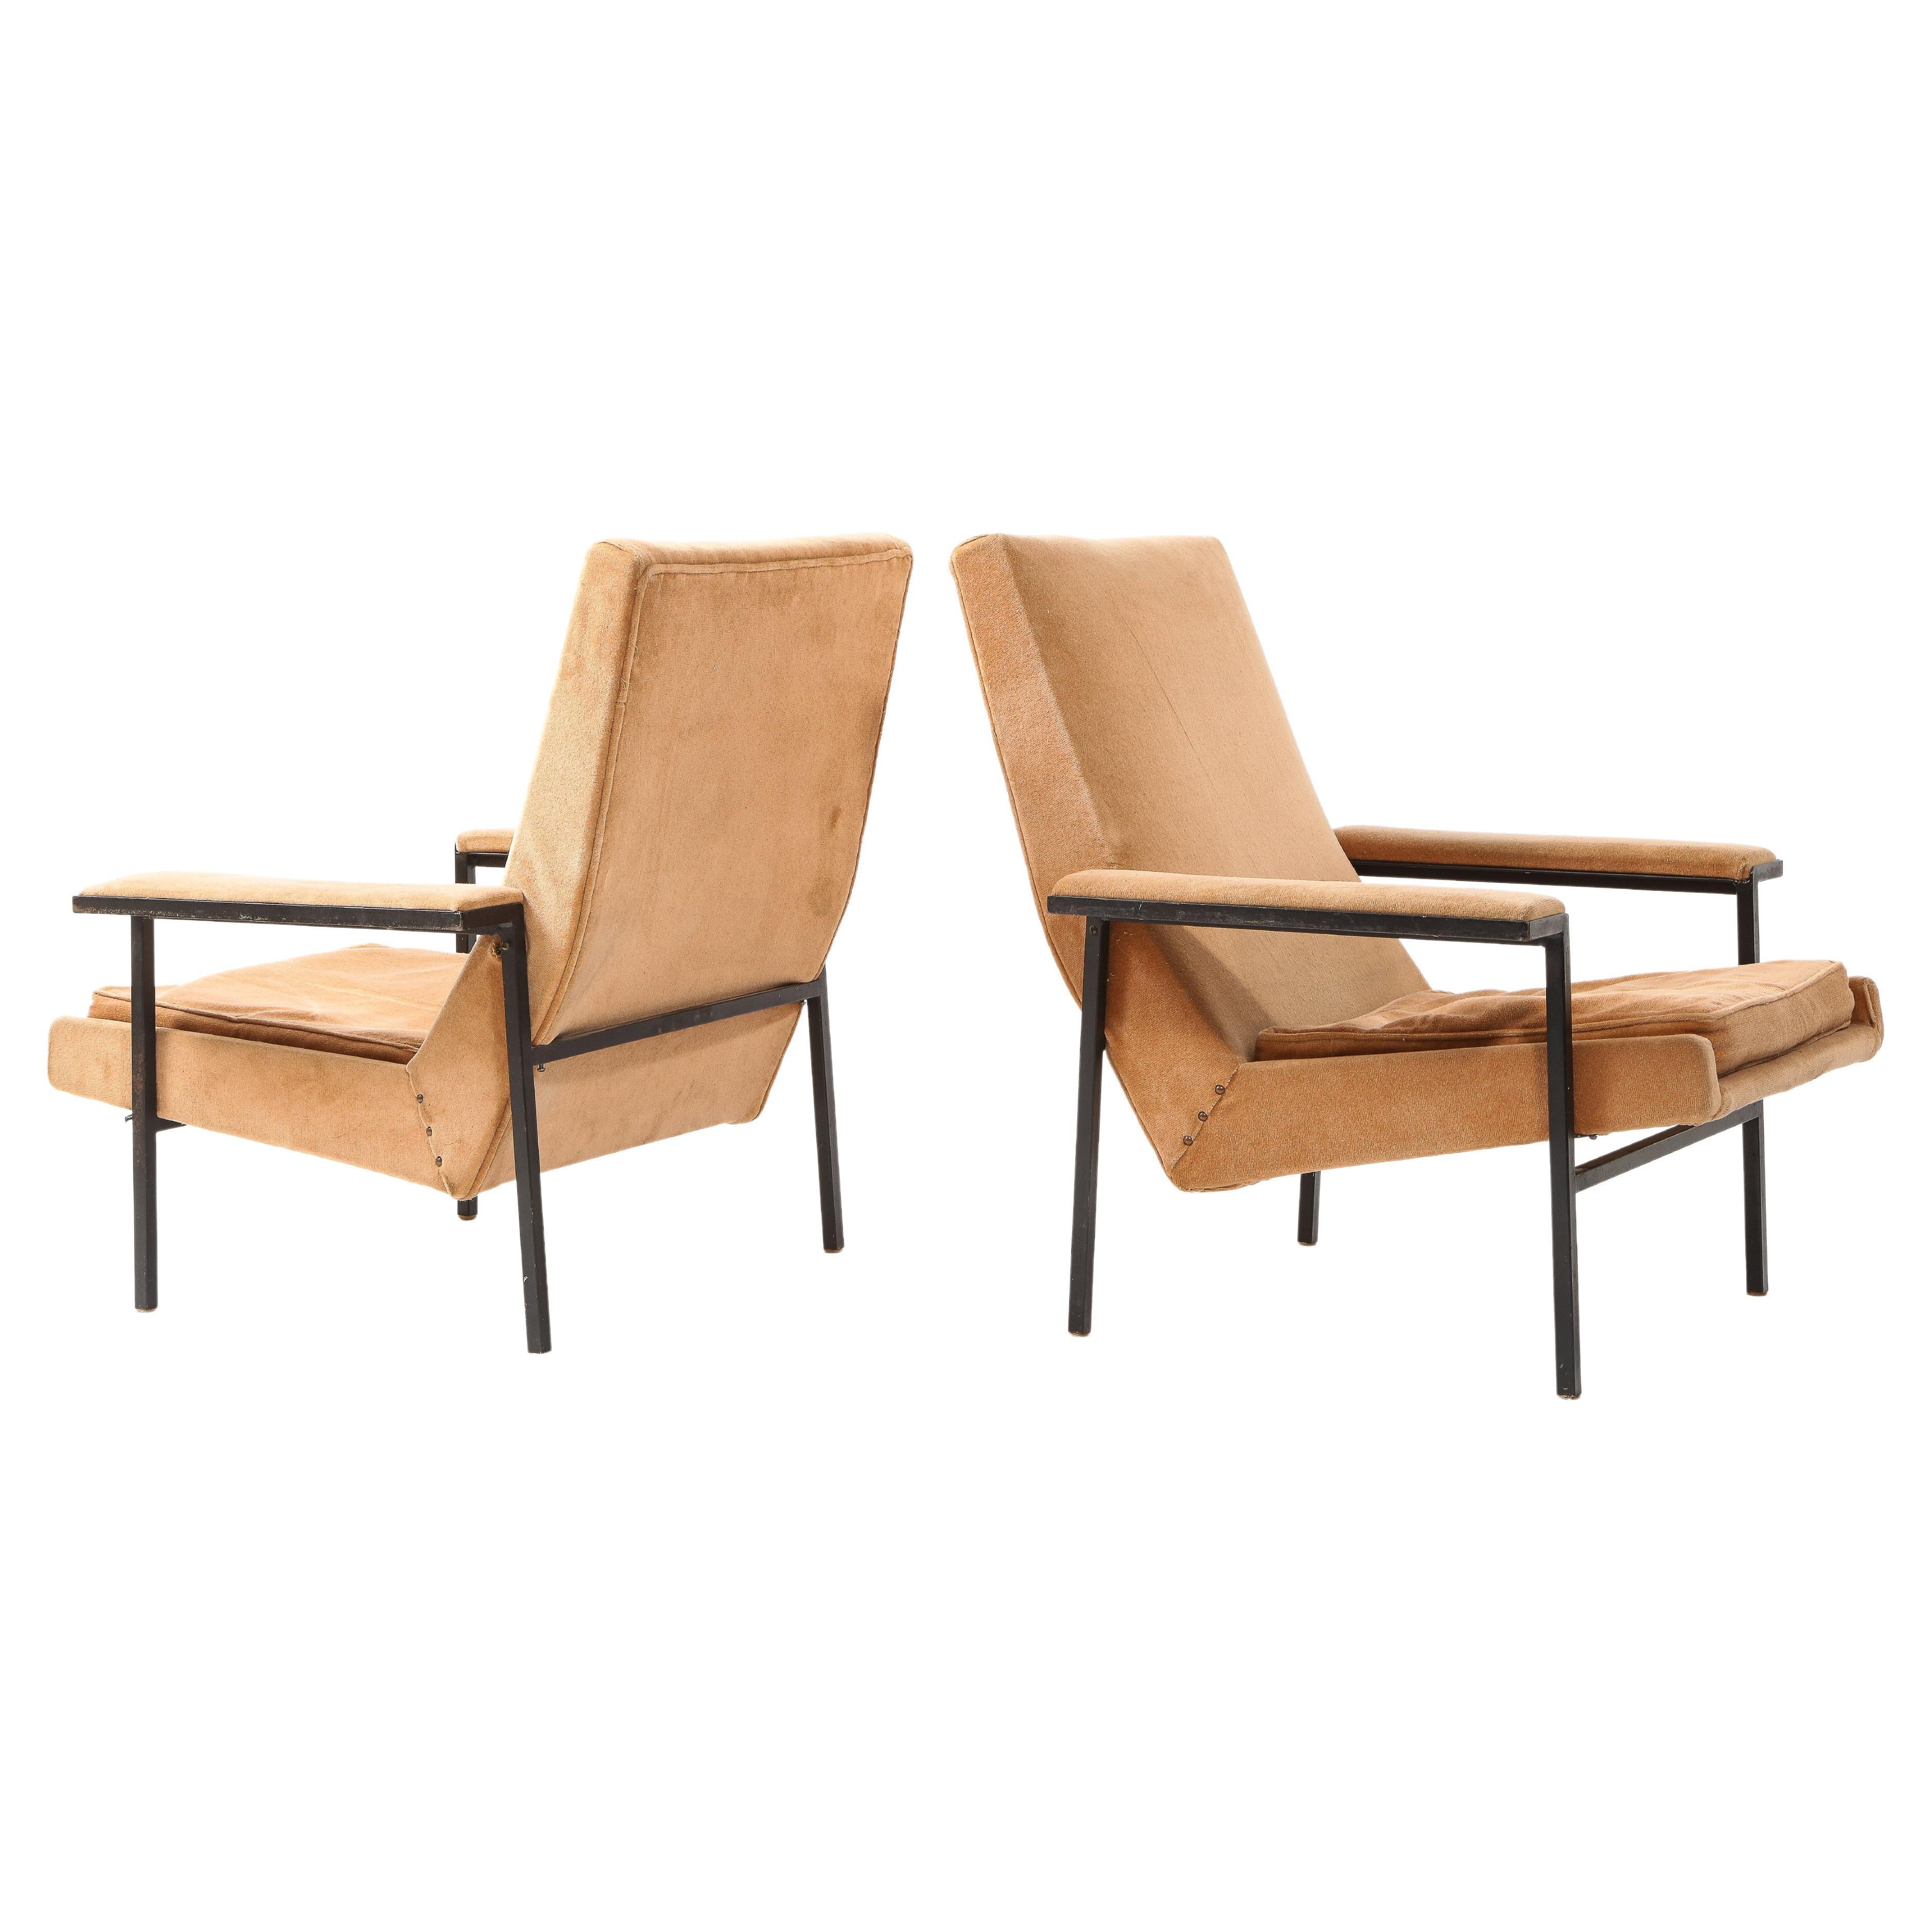 A.R.P Guariche, Motte, Mortier Pair of Armchairs, France 1955 For Sale